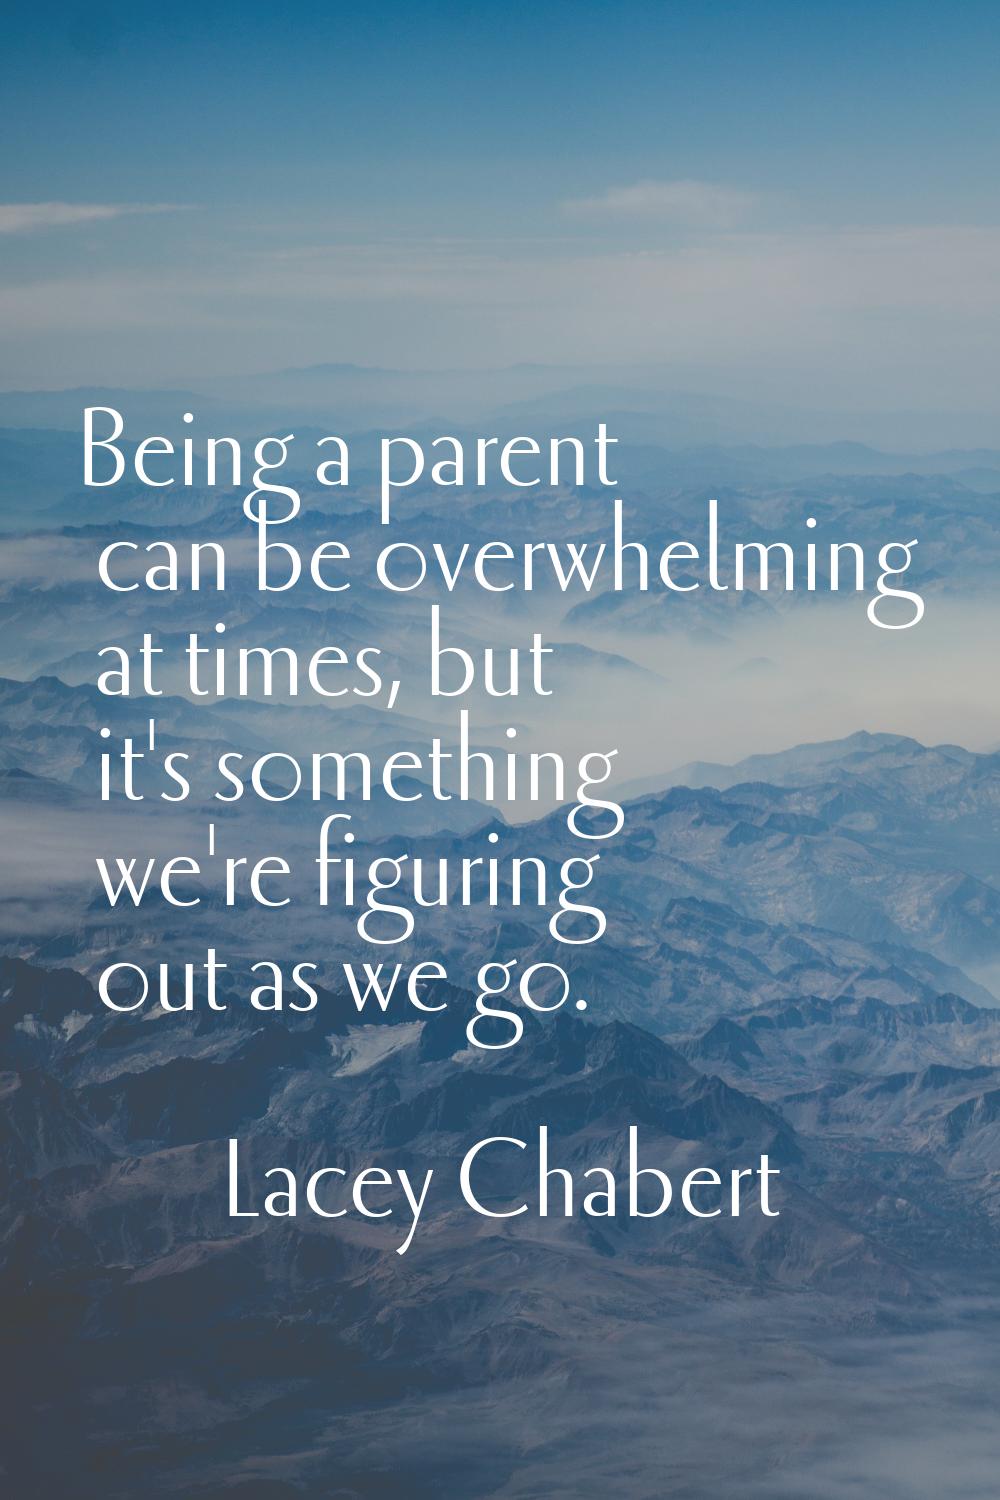 Being a parent can be overwhelming at times, but it's something we're figuring out as we go.